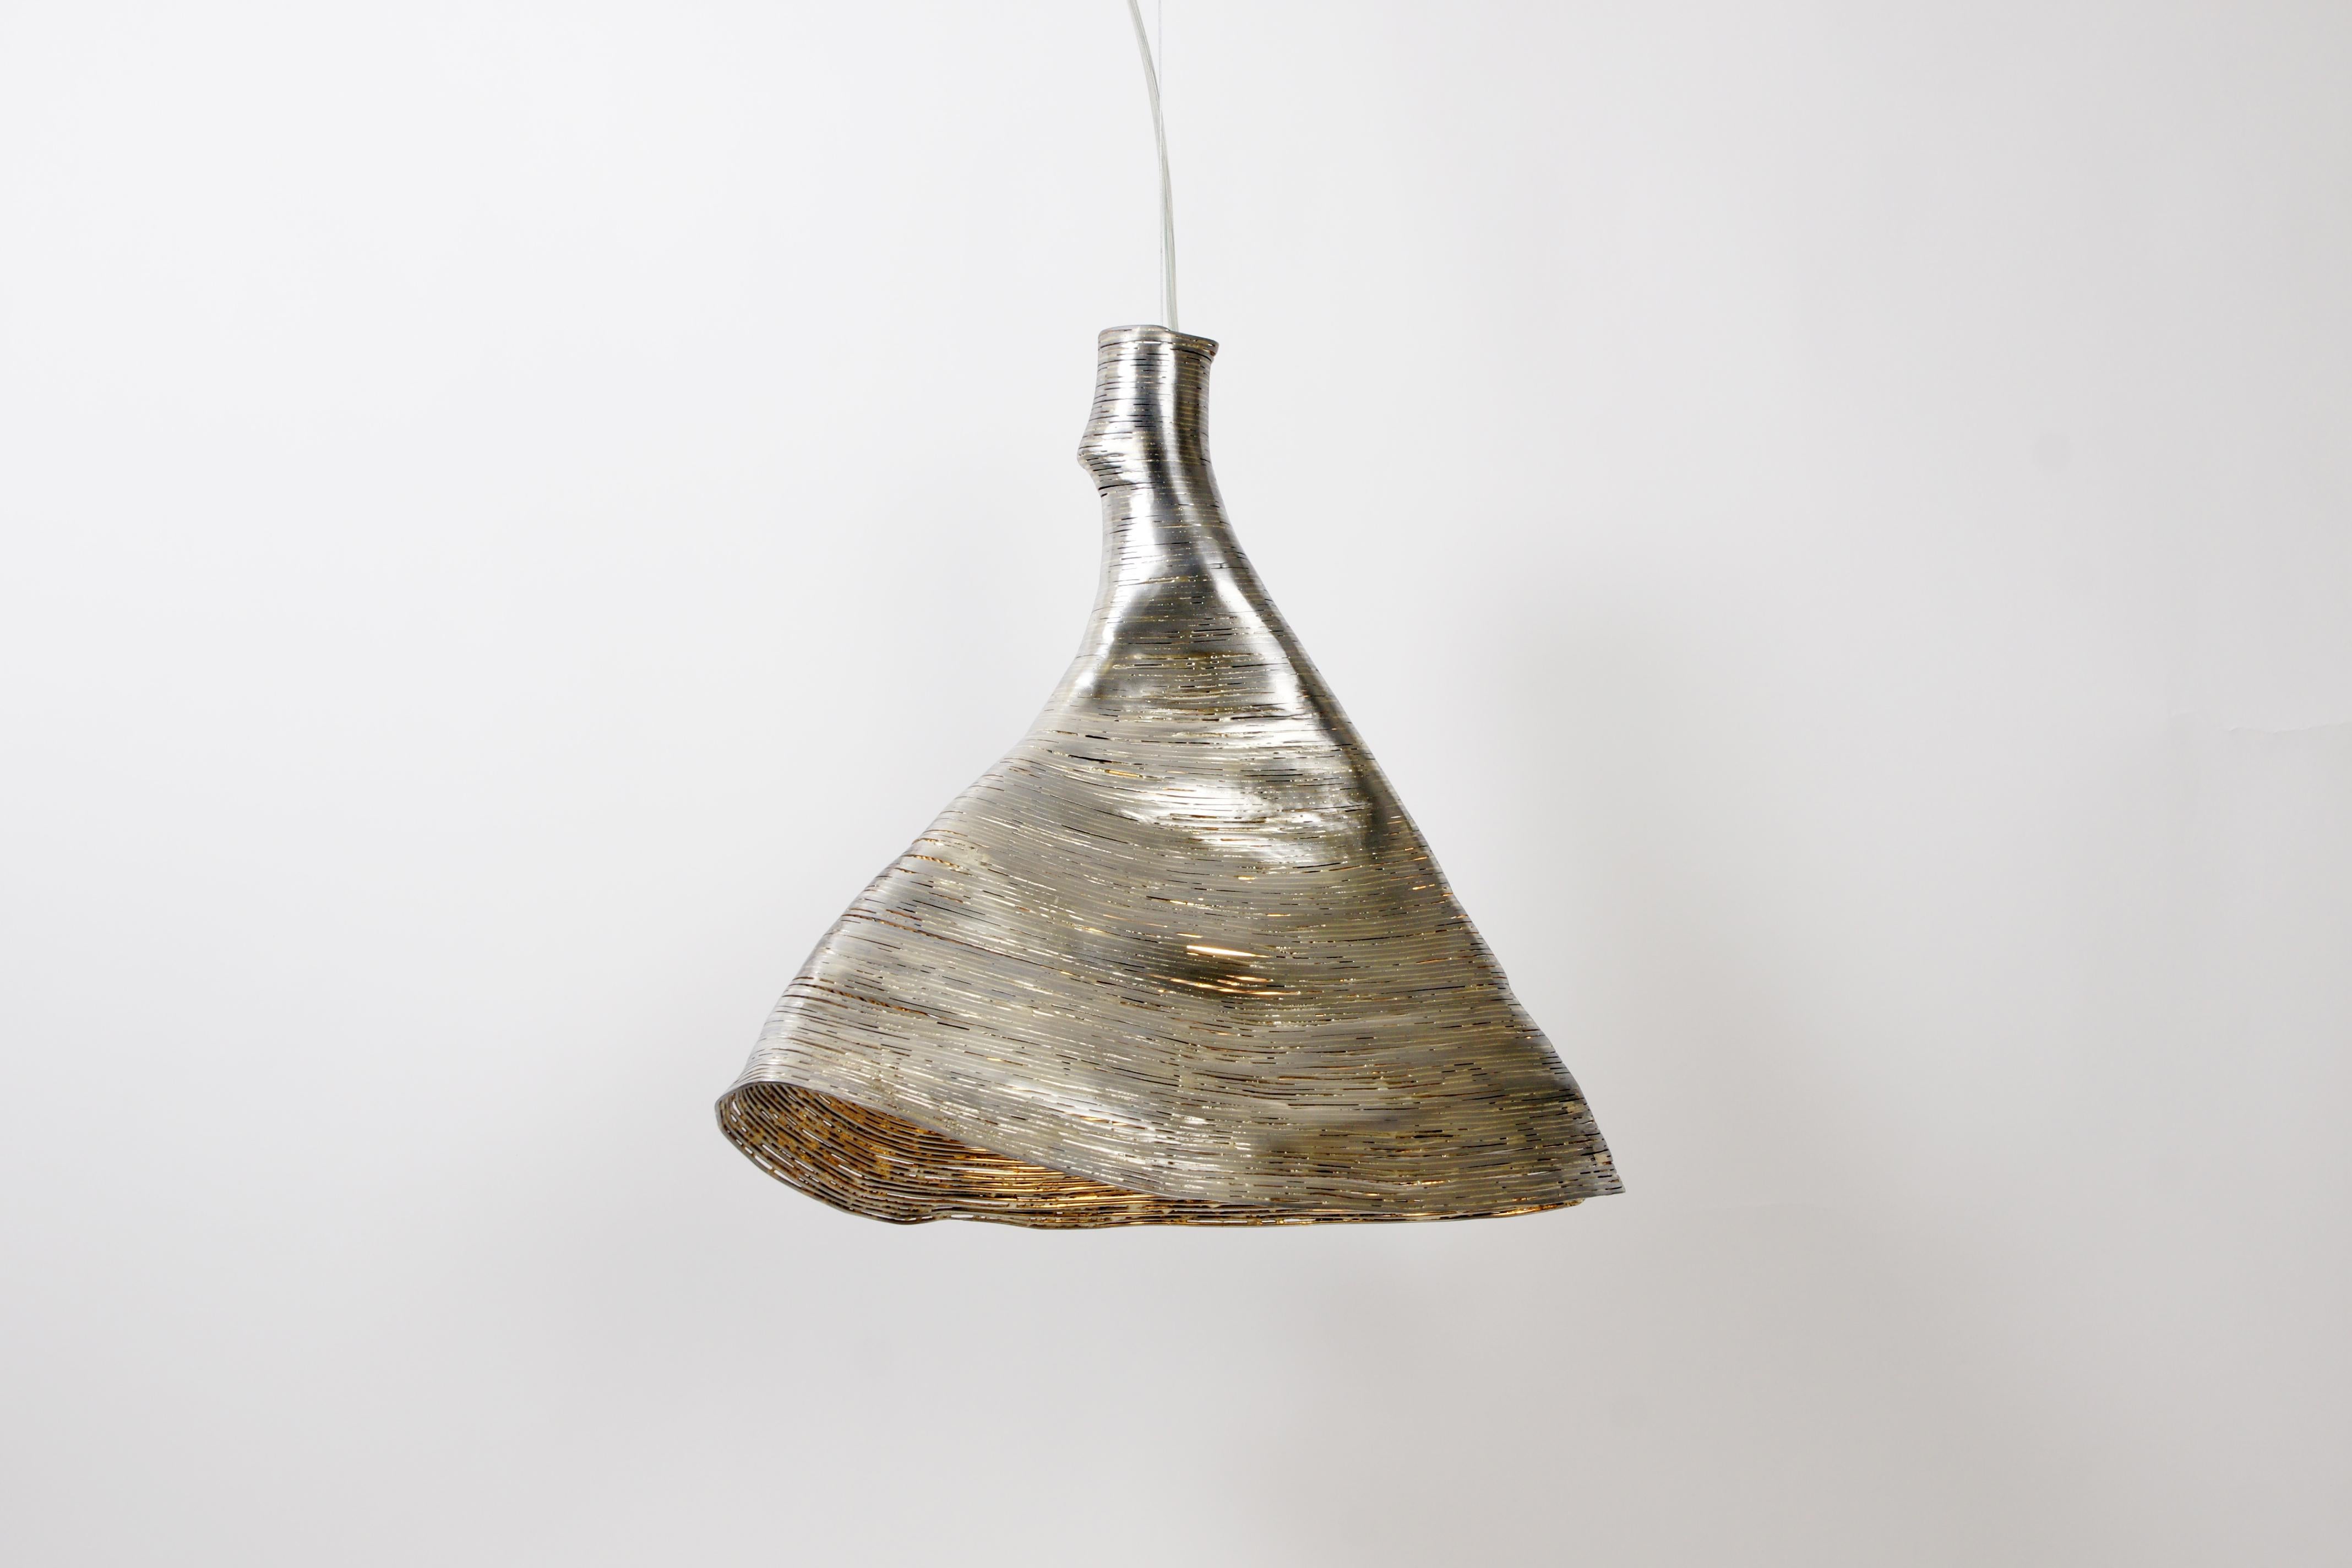 Wrap beech pendant light by Johannes Hemann
Materials: Brass and steel
Dimensions: height 45cm , Ø 38cm

‘wrap, the series of objects by german designer Johannes Hemann examines the shells of things remaining after their disappearance. For this